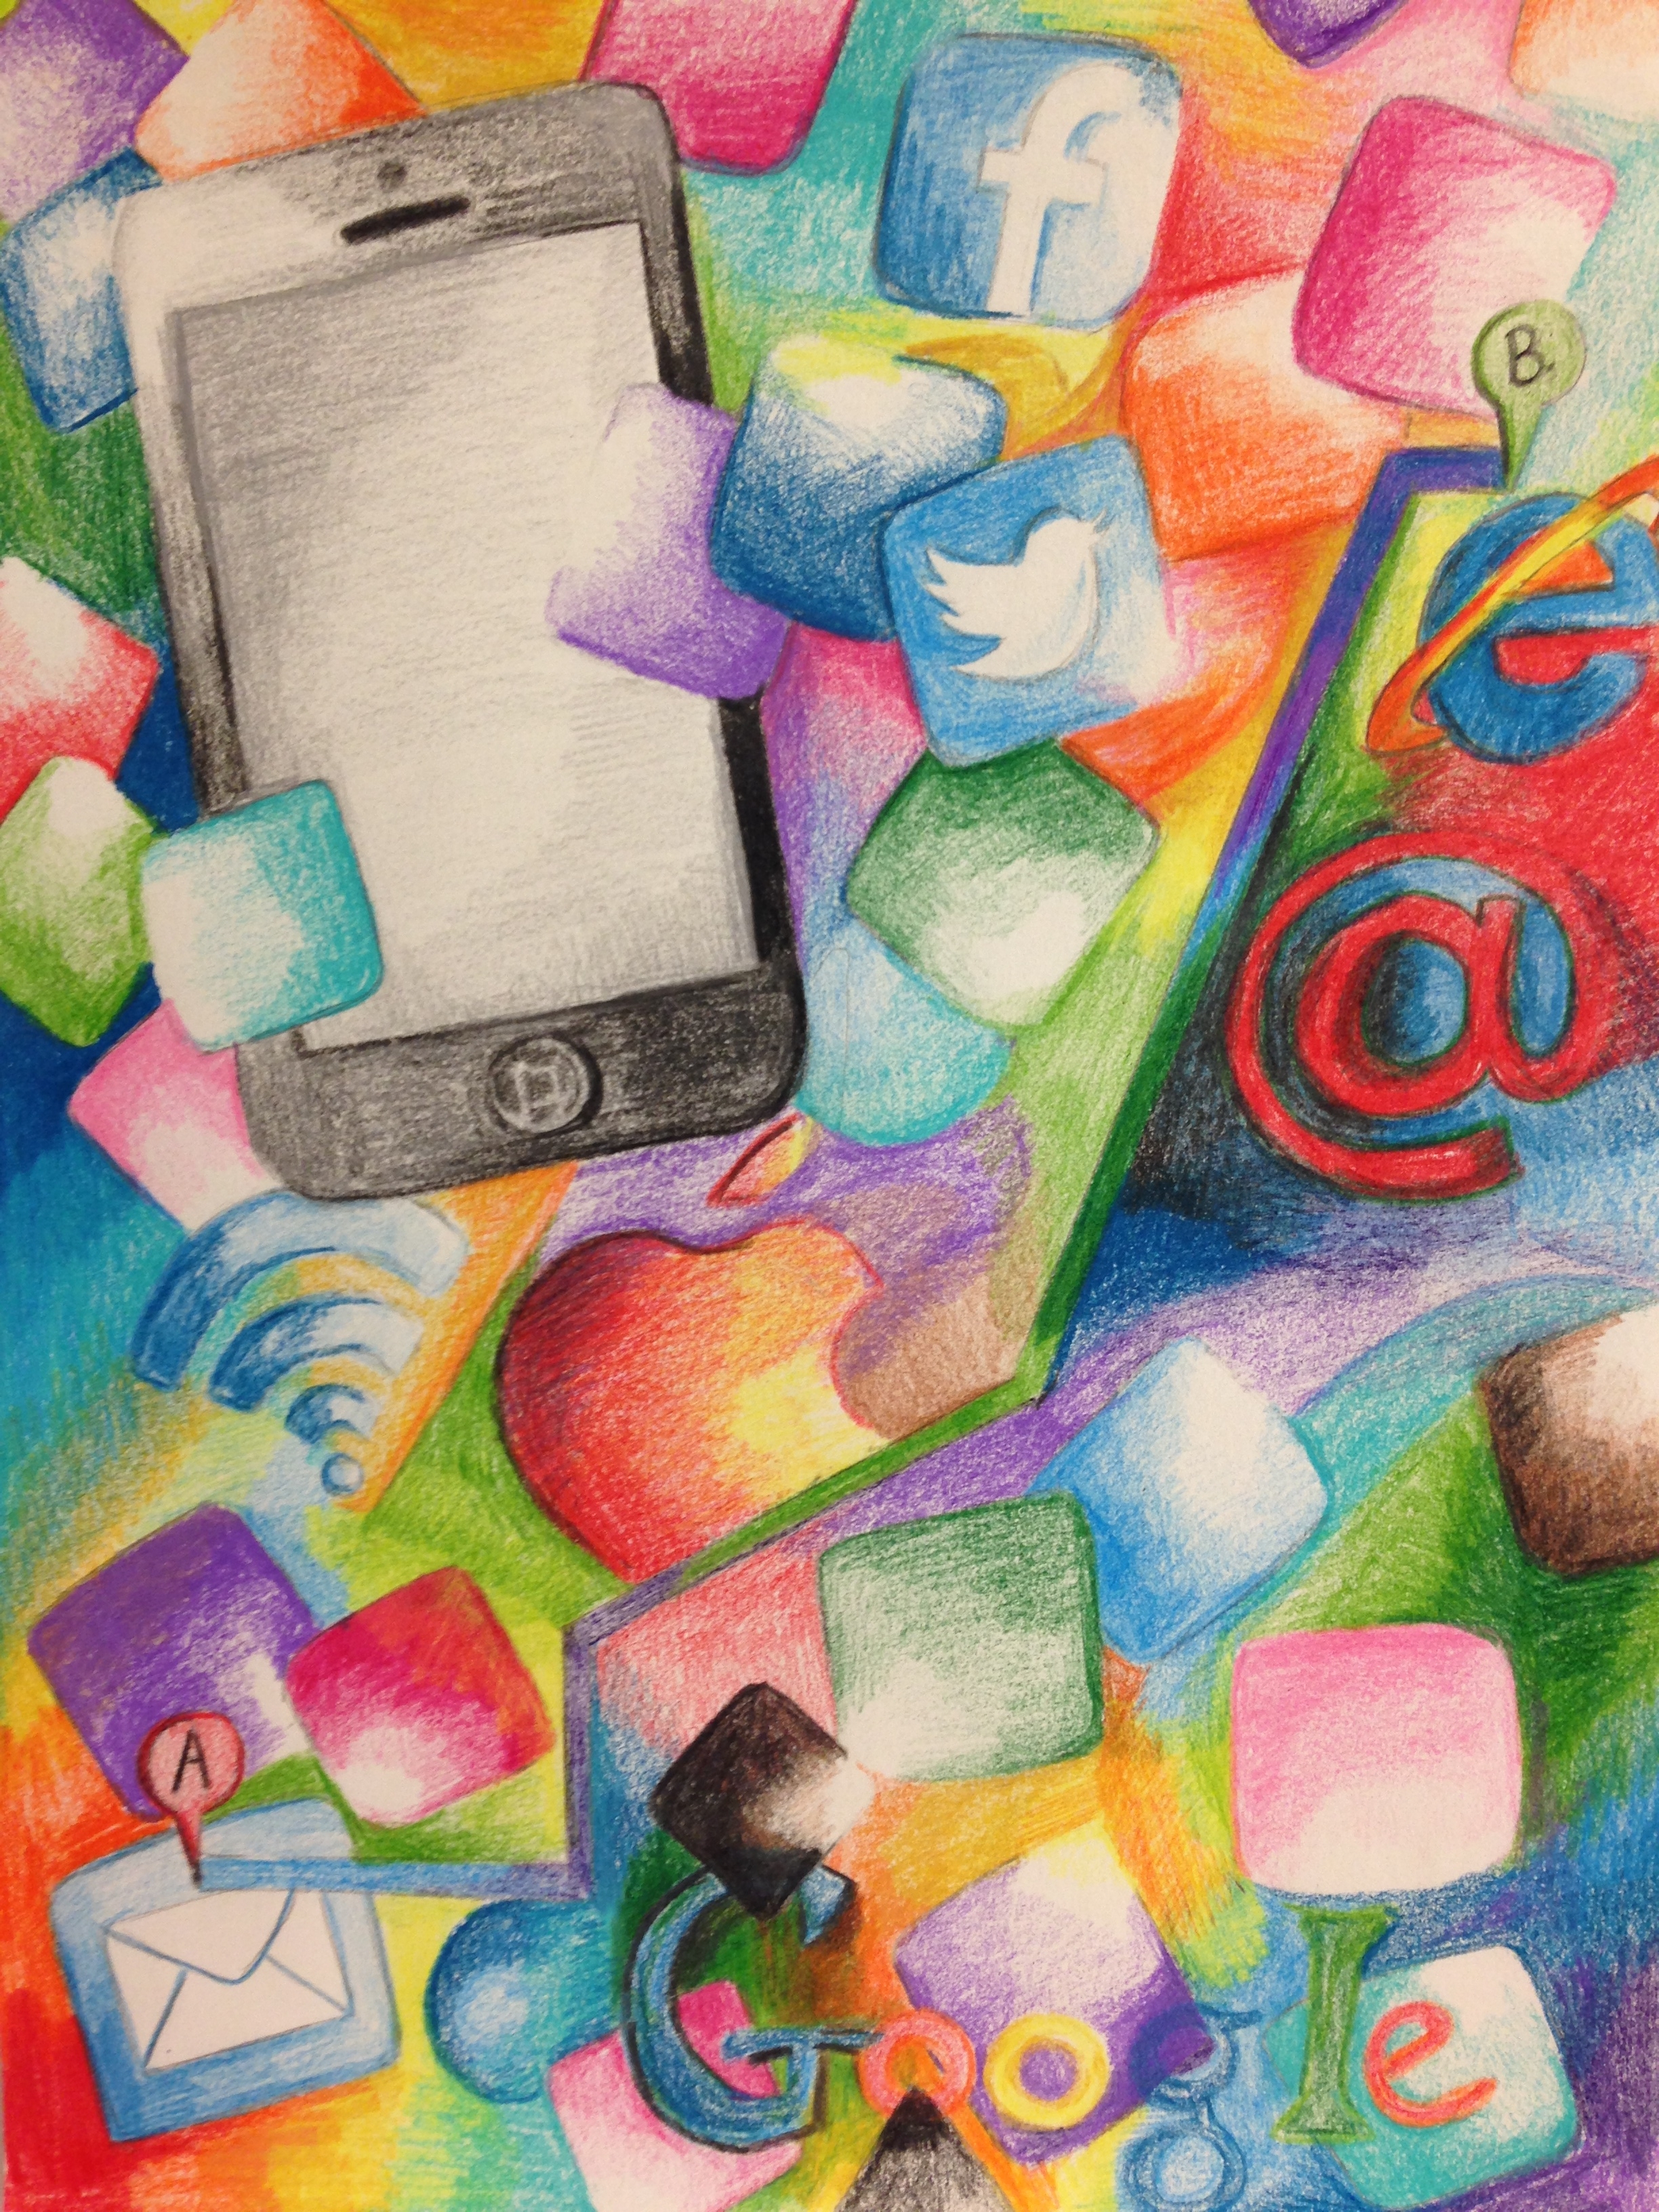 Colorful drawing featuring geometric forms, logos and an image of a cell phone